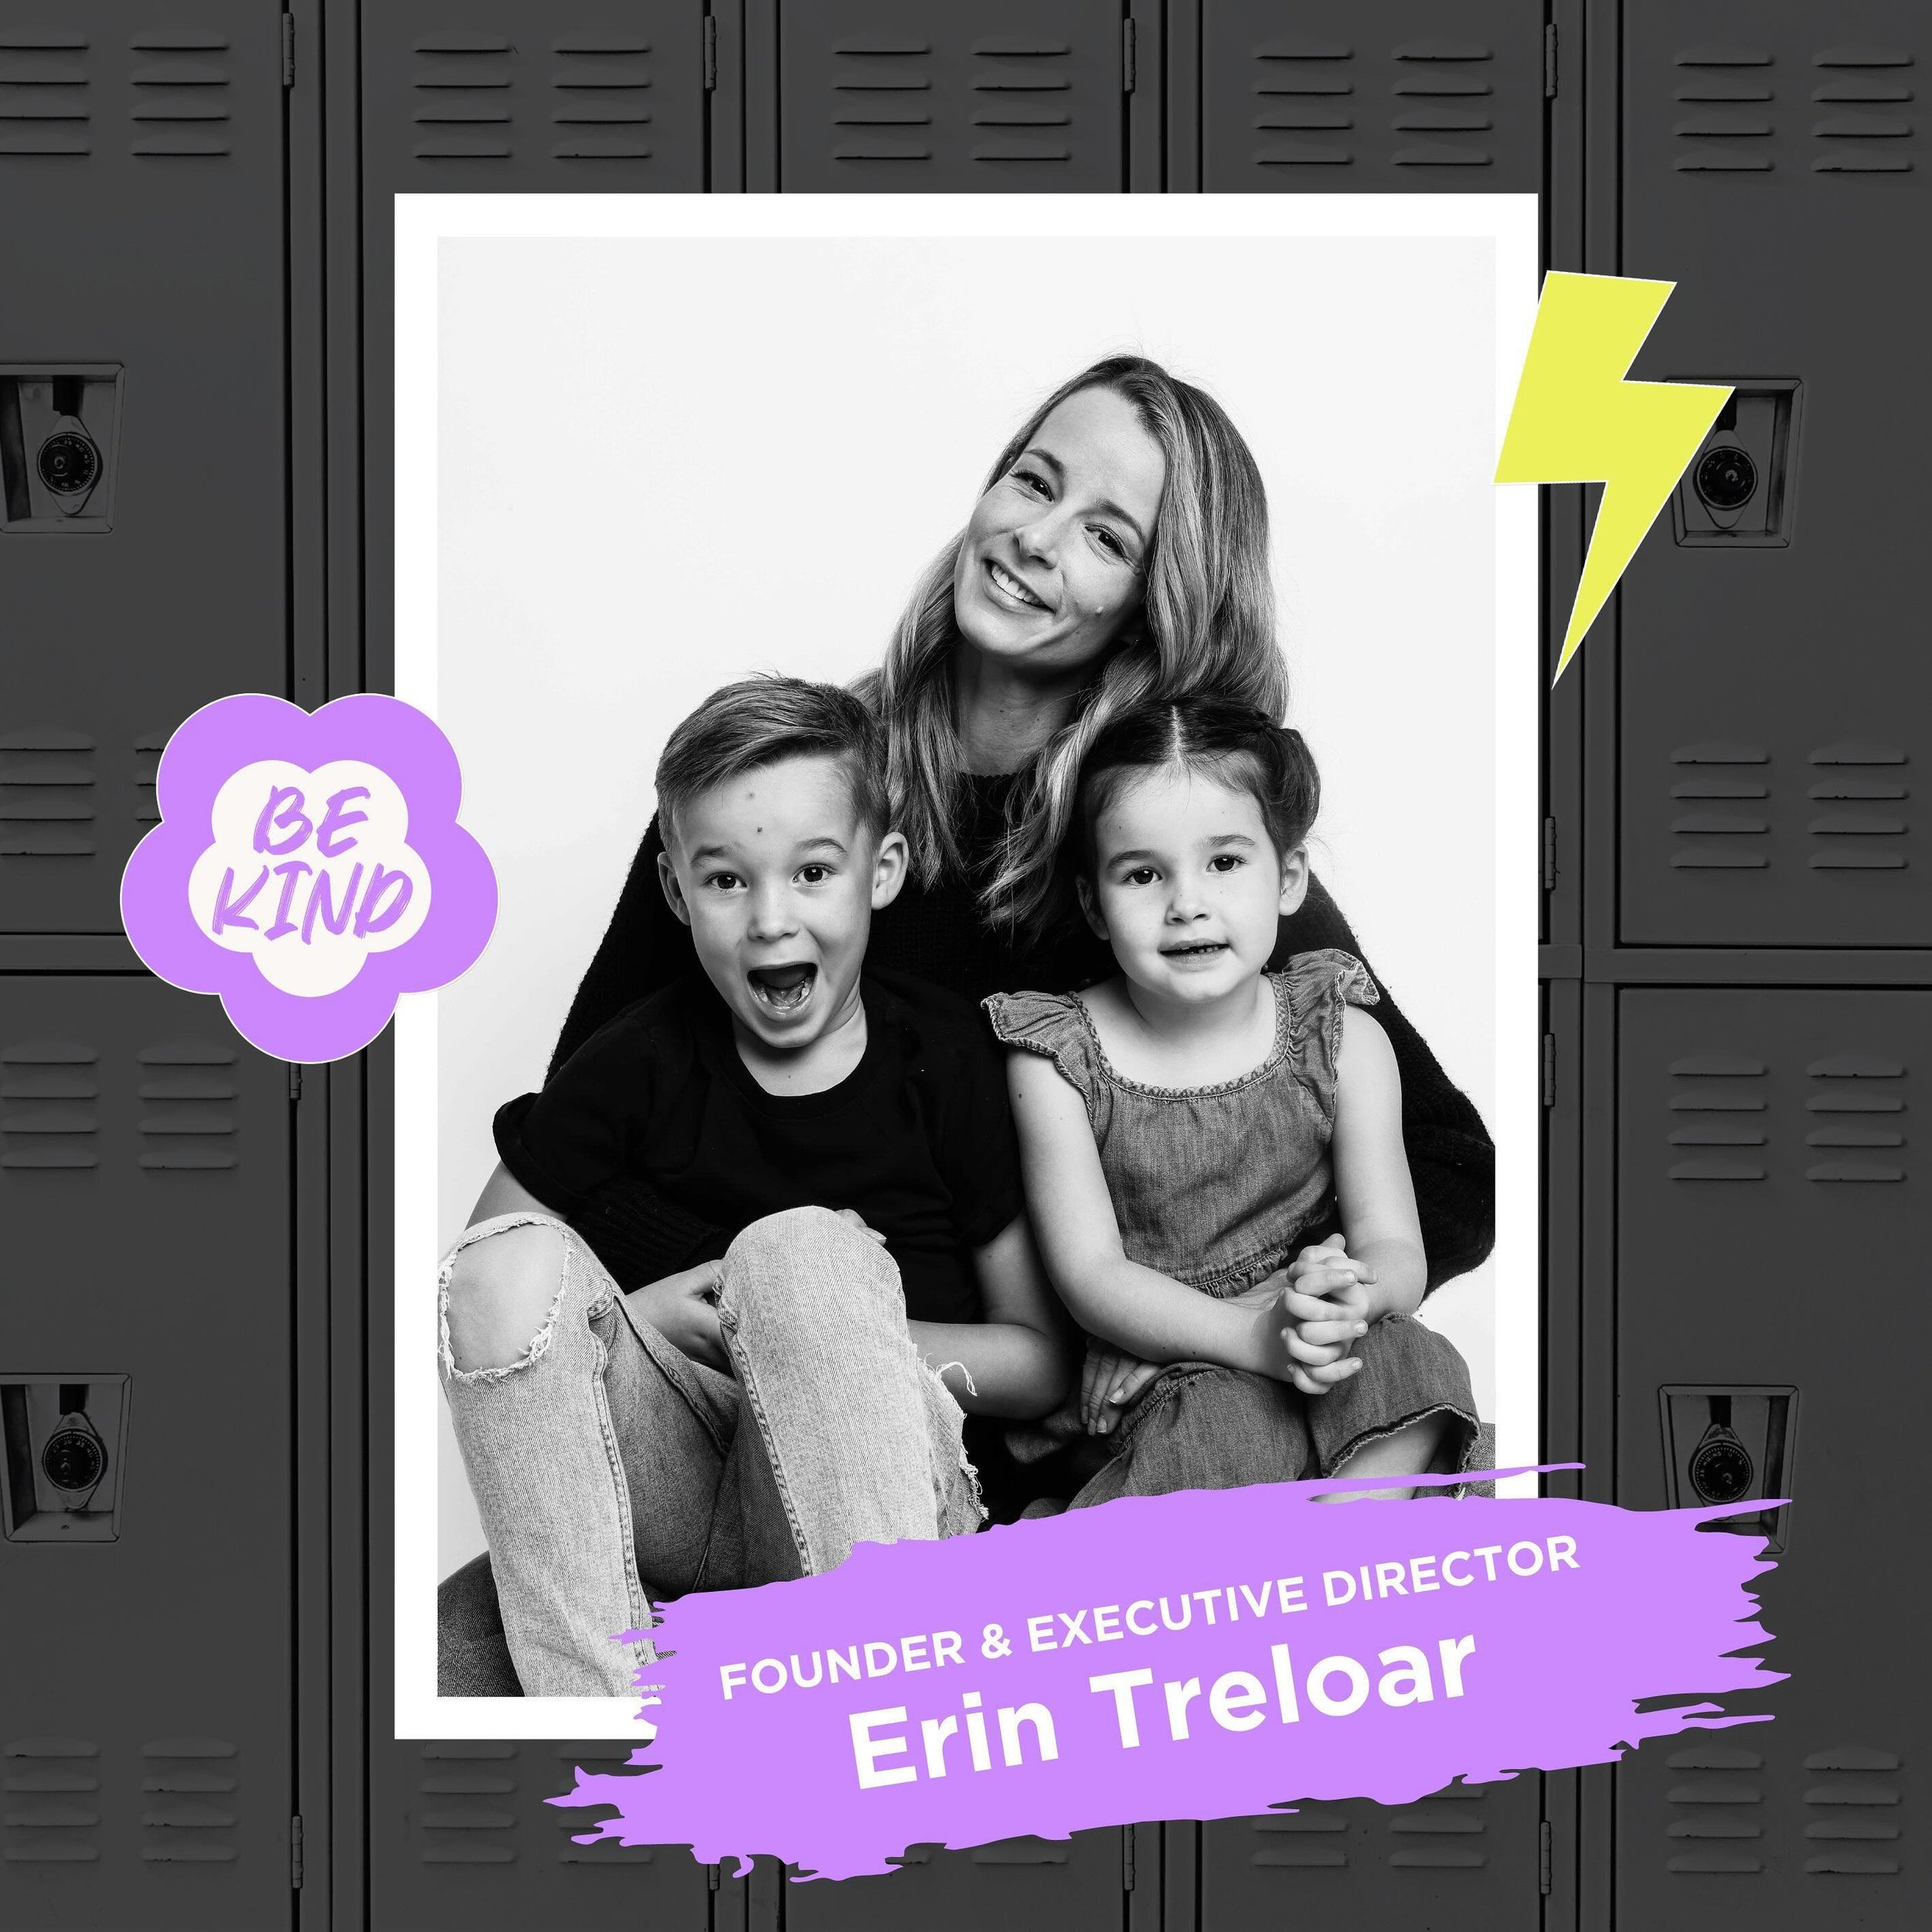 Behind Free to Be, not only is there a team of passionate facilitators supporting Erin&rsquo;s goal of creating a lasting impact on today&rsquo;s youth &mdash; but true statistics of what we&rsquo;ve able to accomplish so far.

✔️ We are helping the 